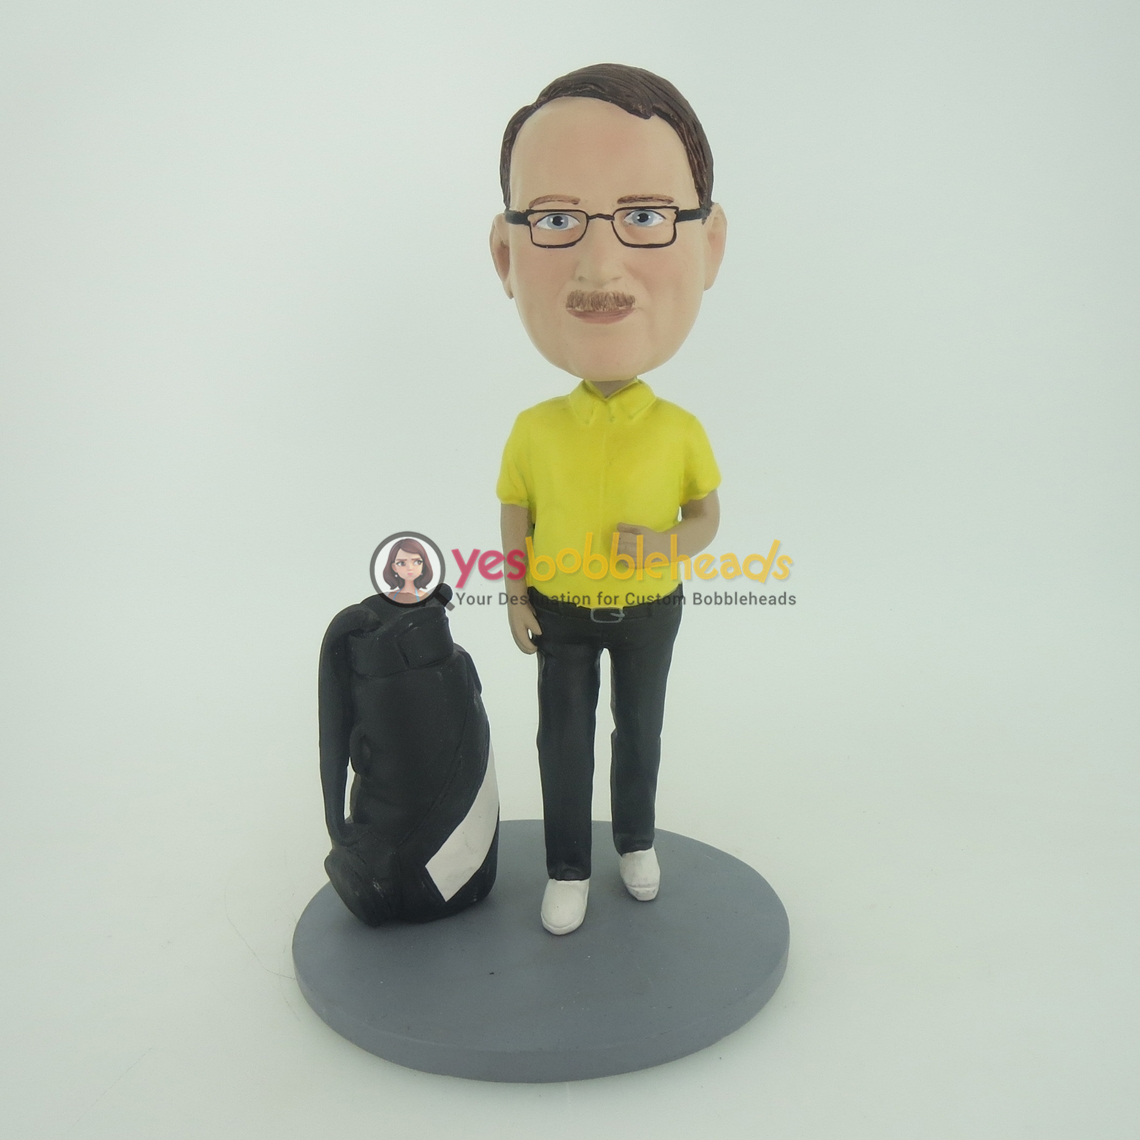 Picture of Custom Bobblehead Doll: Man And Golf Club